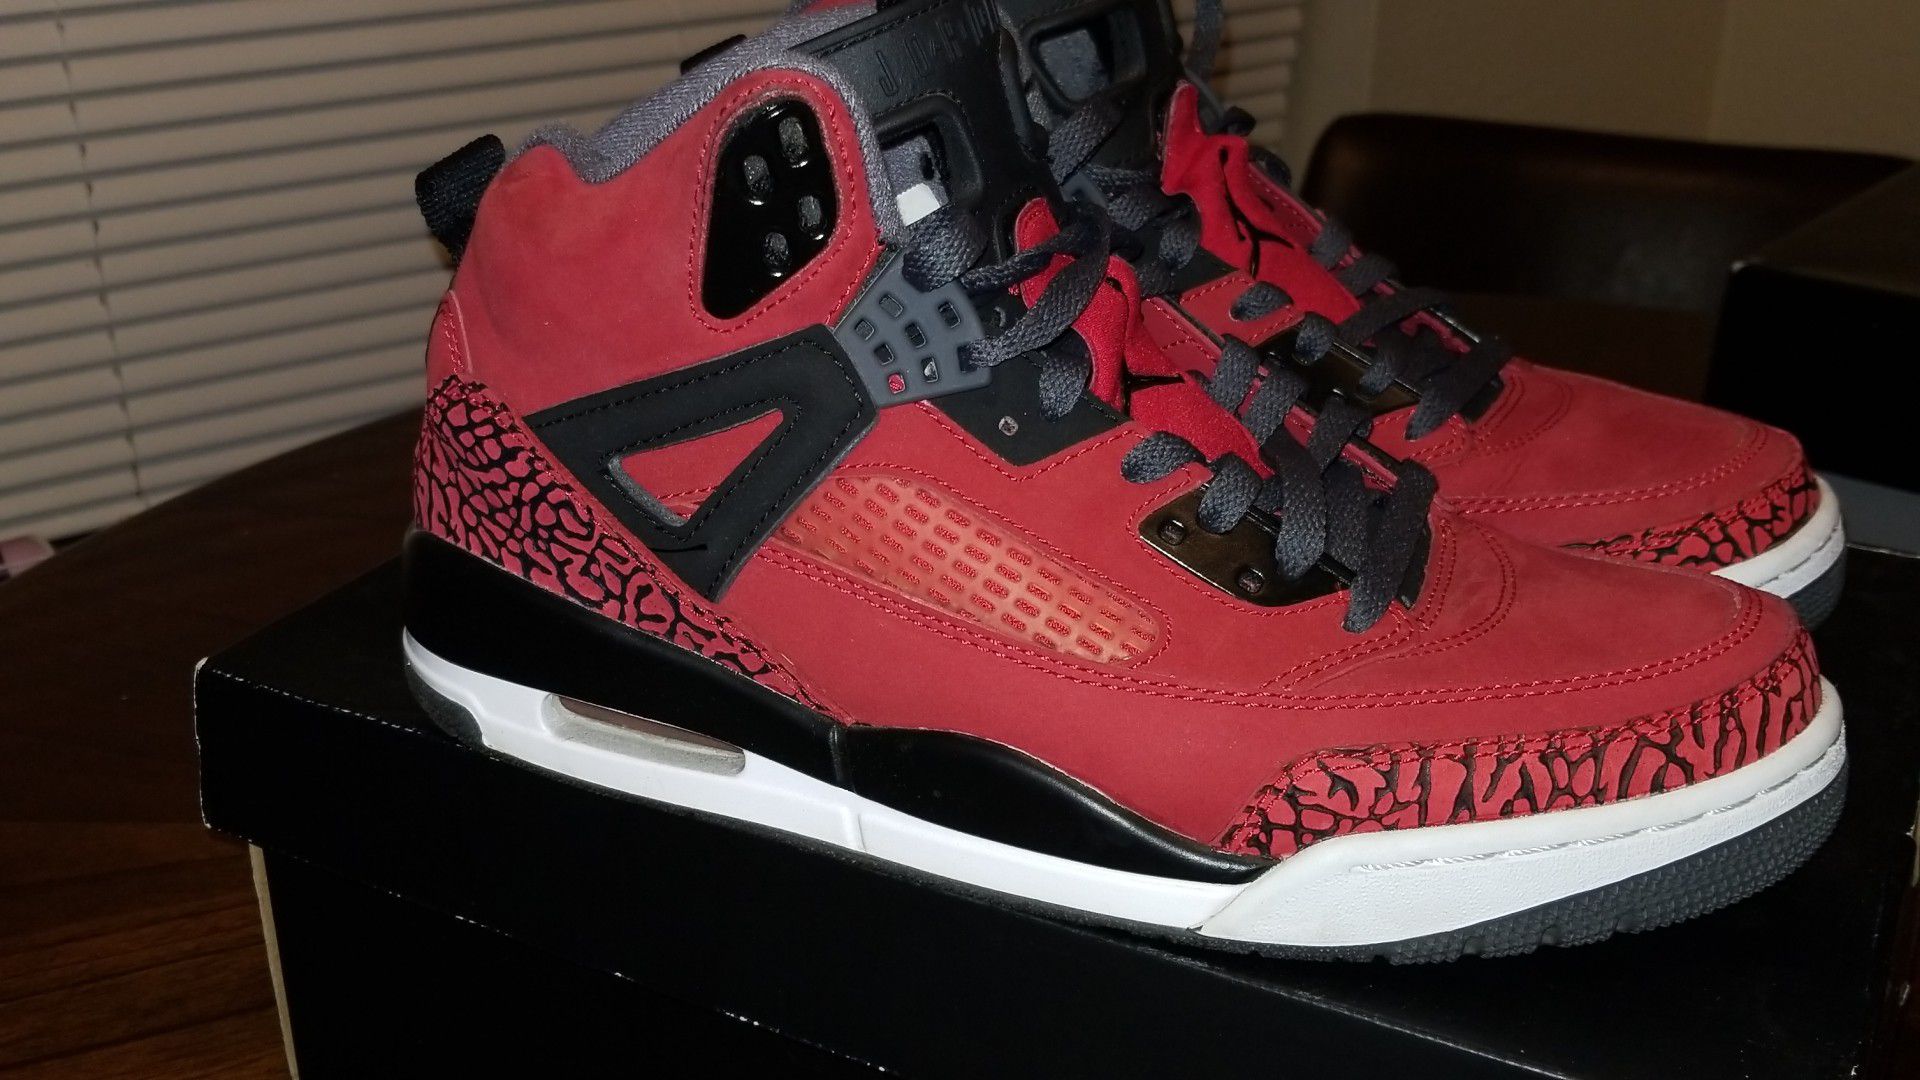 Jordan spizike like new 9 out of 10 condition in box size 9